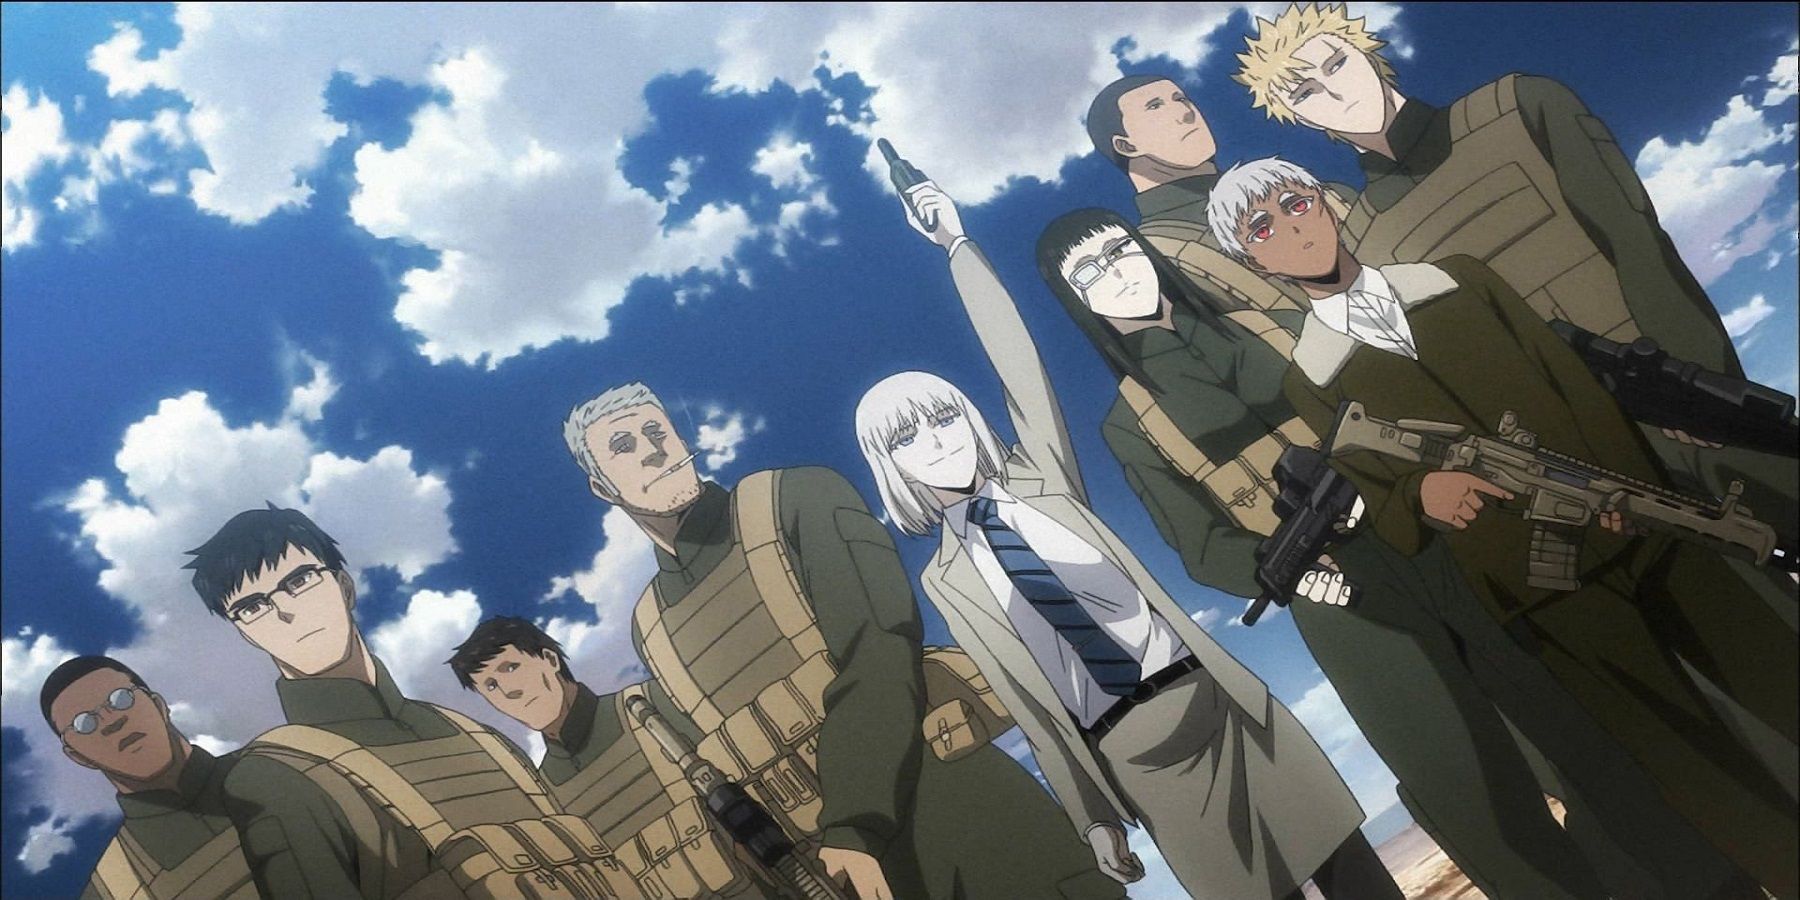 Jormungand characters standing together